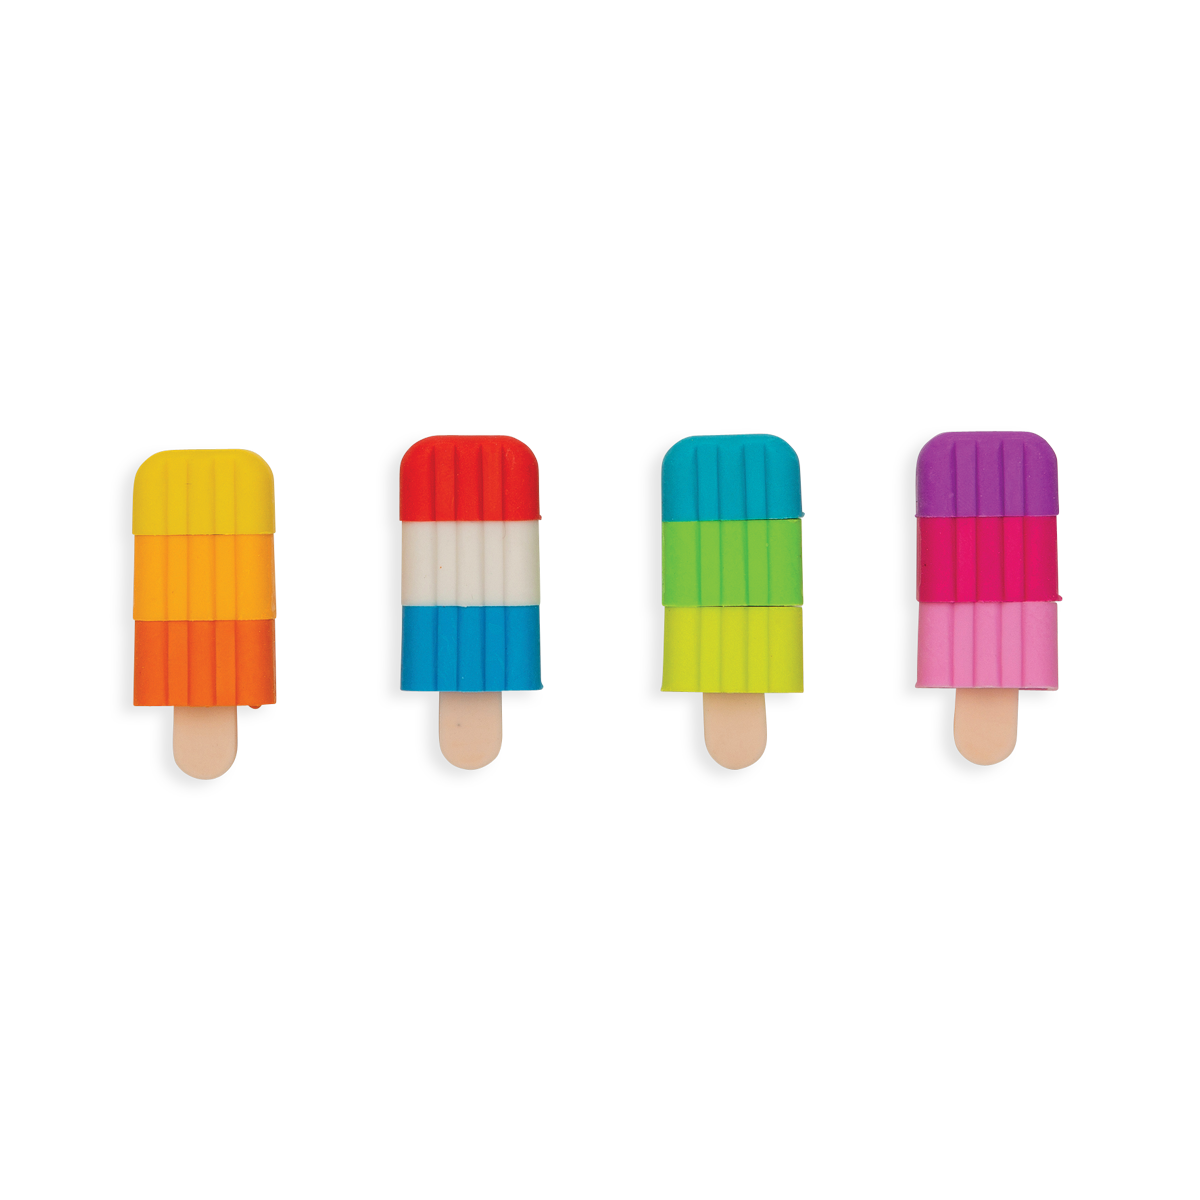 4 of the Icy Pops Puzzle Erasers in a row.